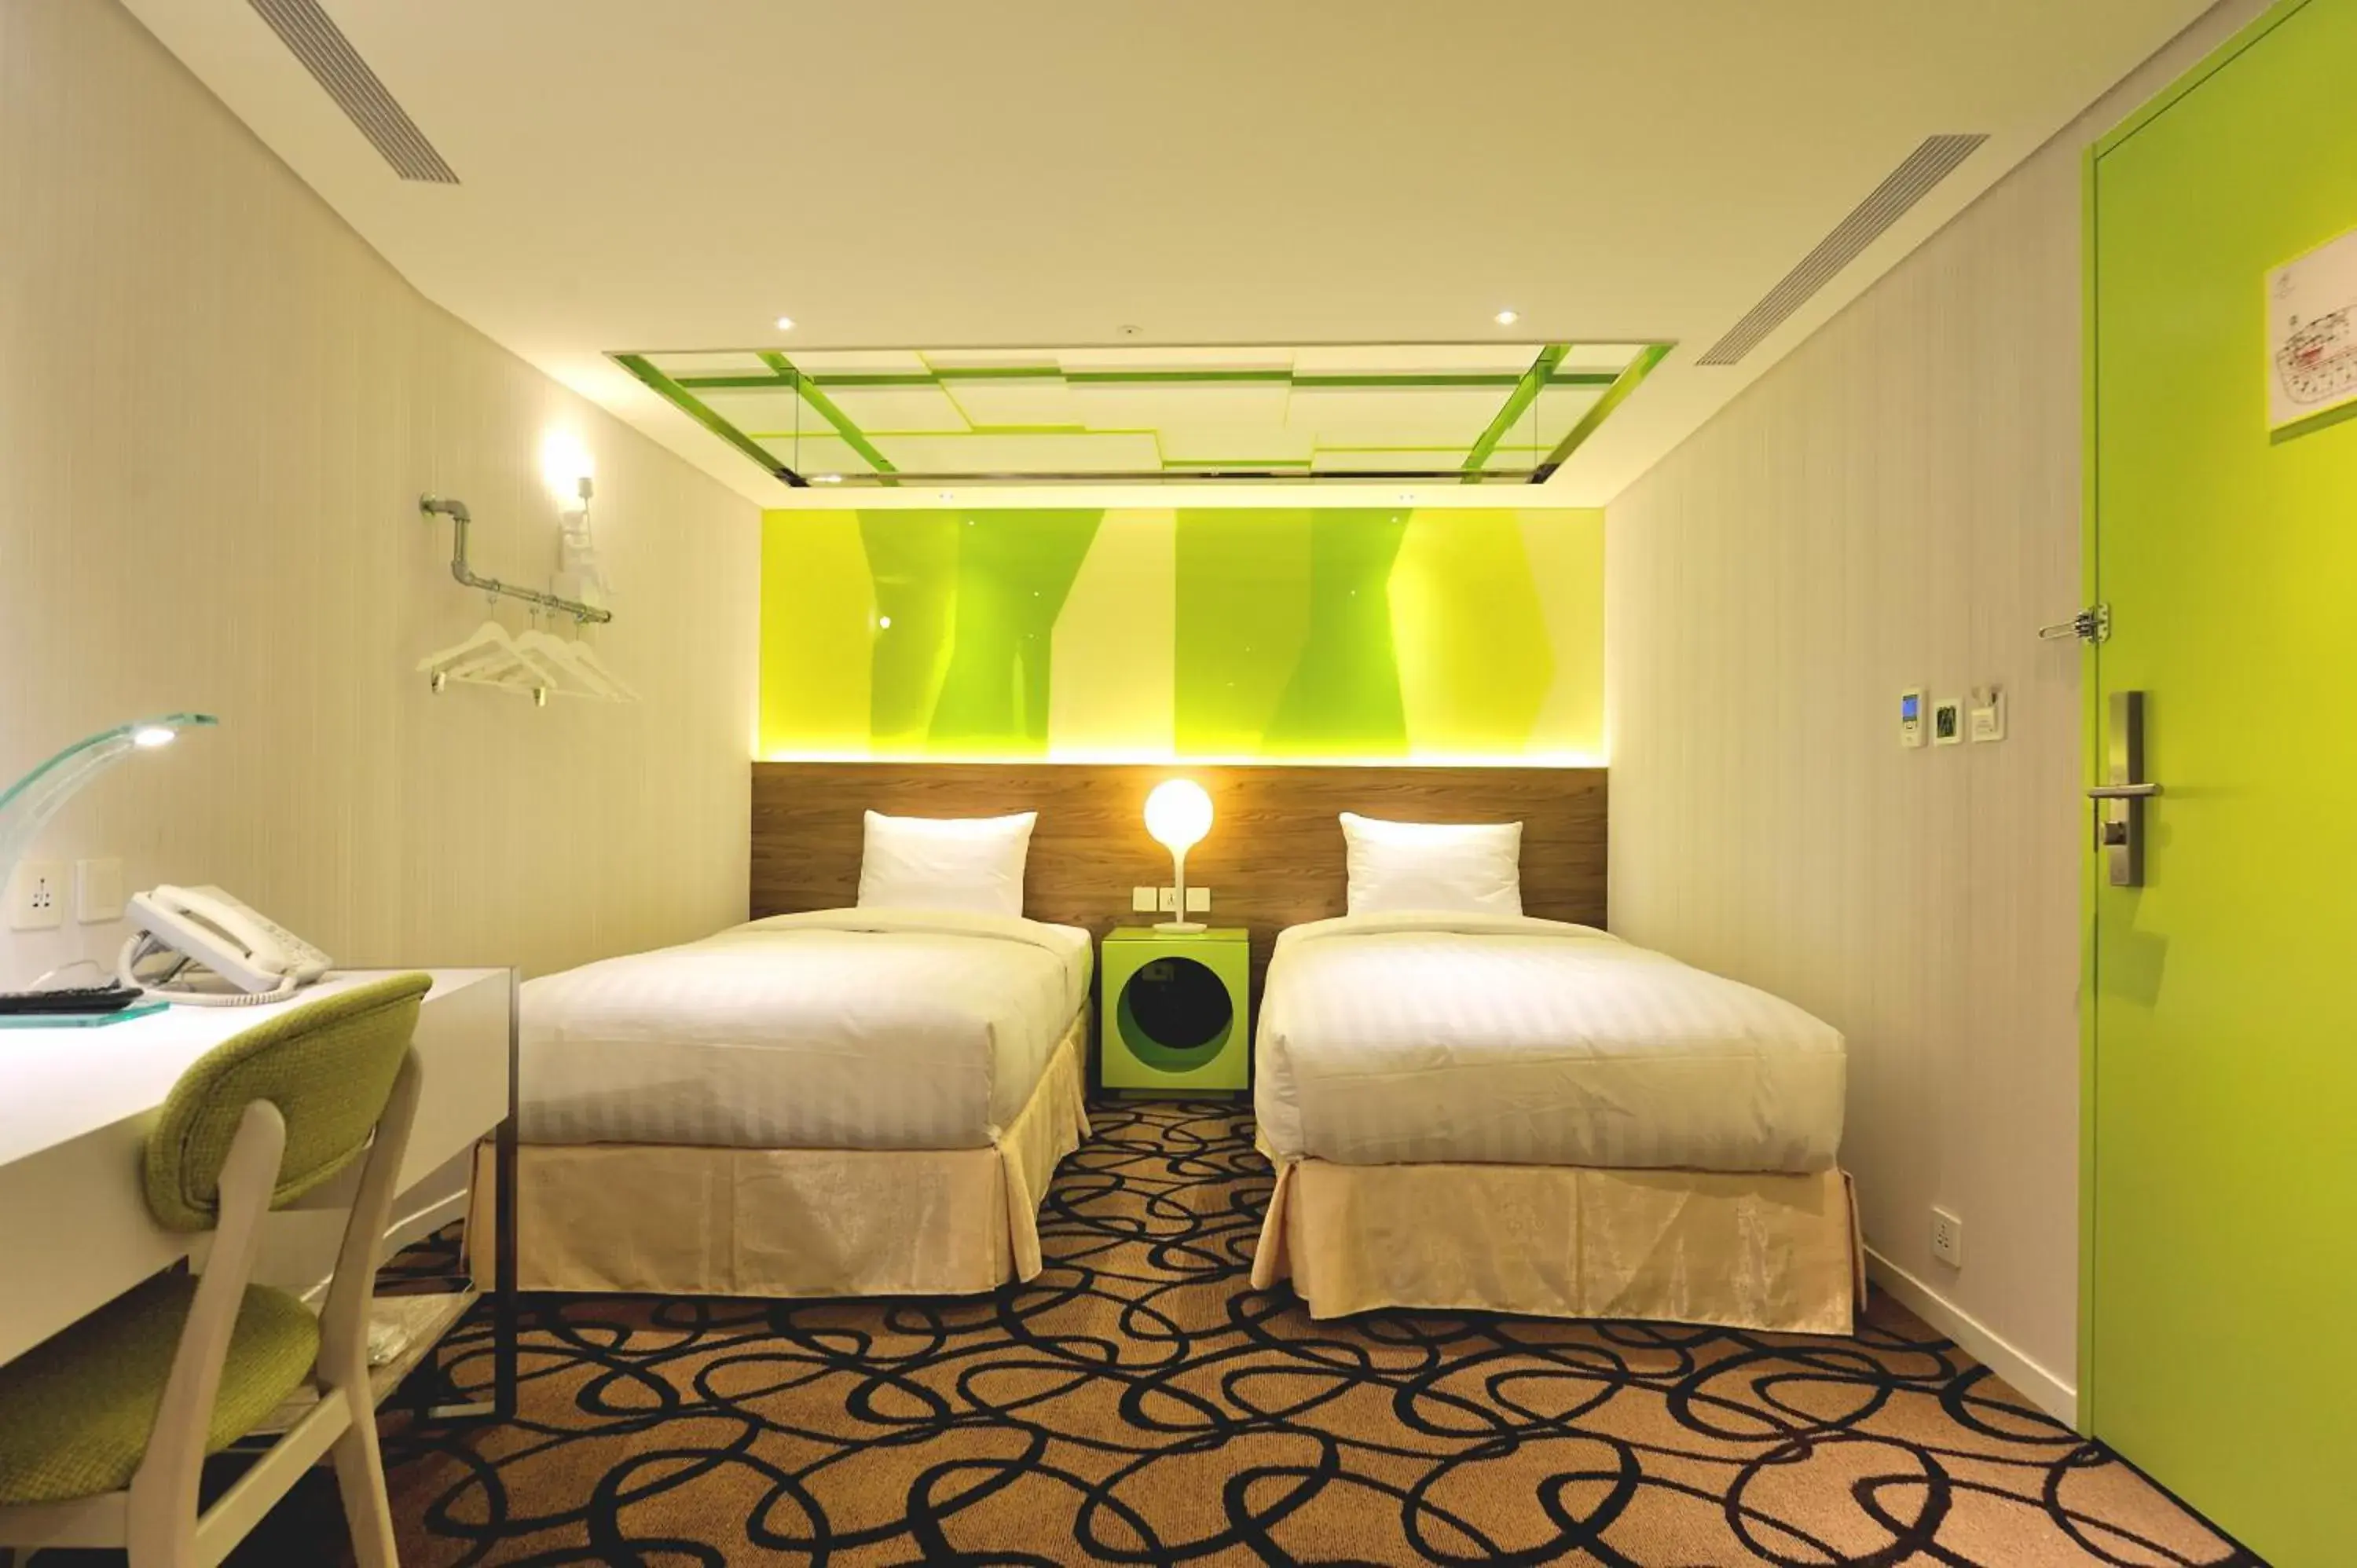 Property building, Bed in Green World Hotel - Zhonghua